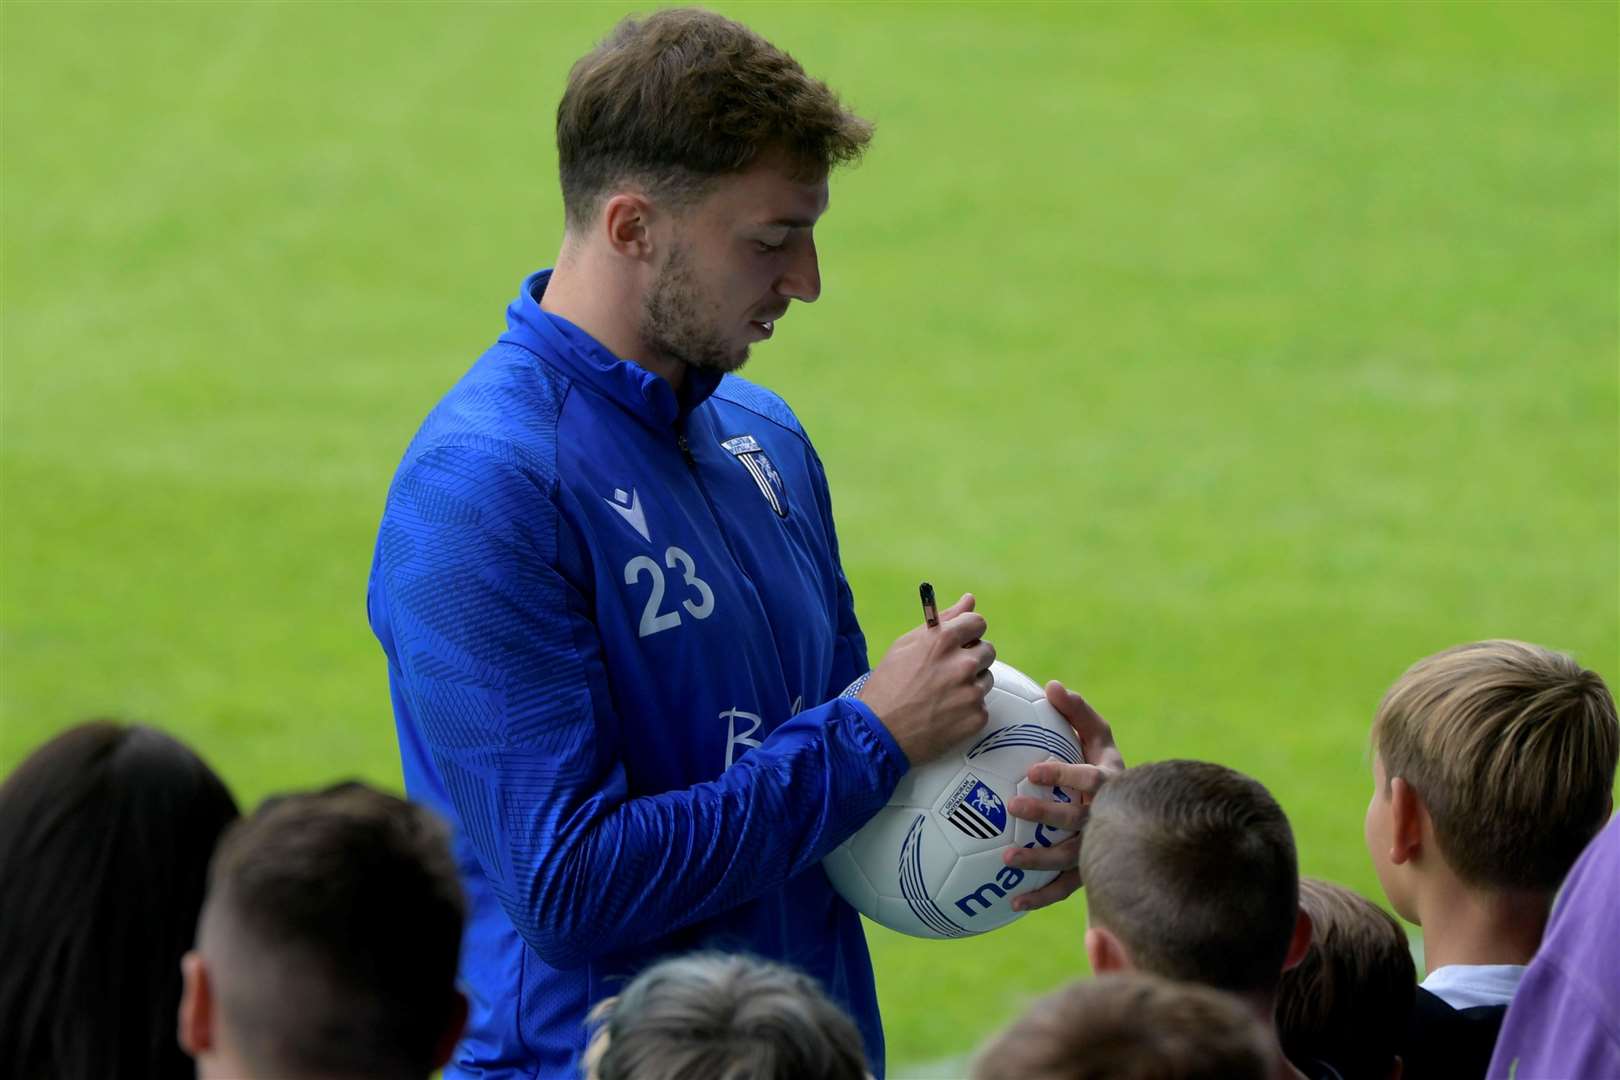 Conor Masterson signs a ball for a fan Picture: Barry Goodwin